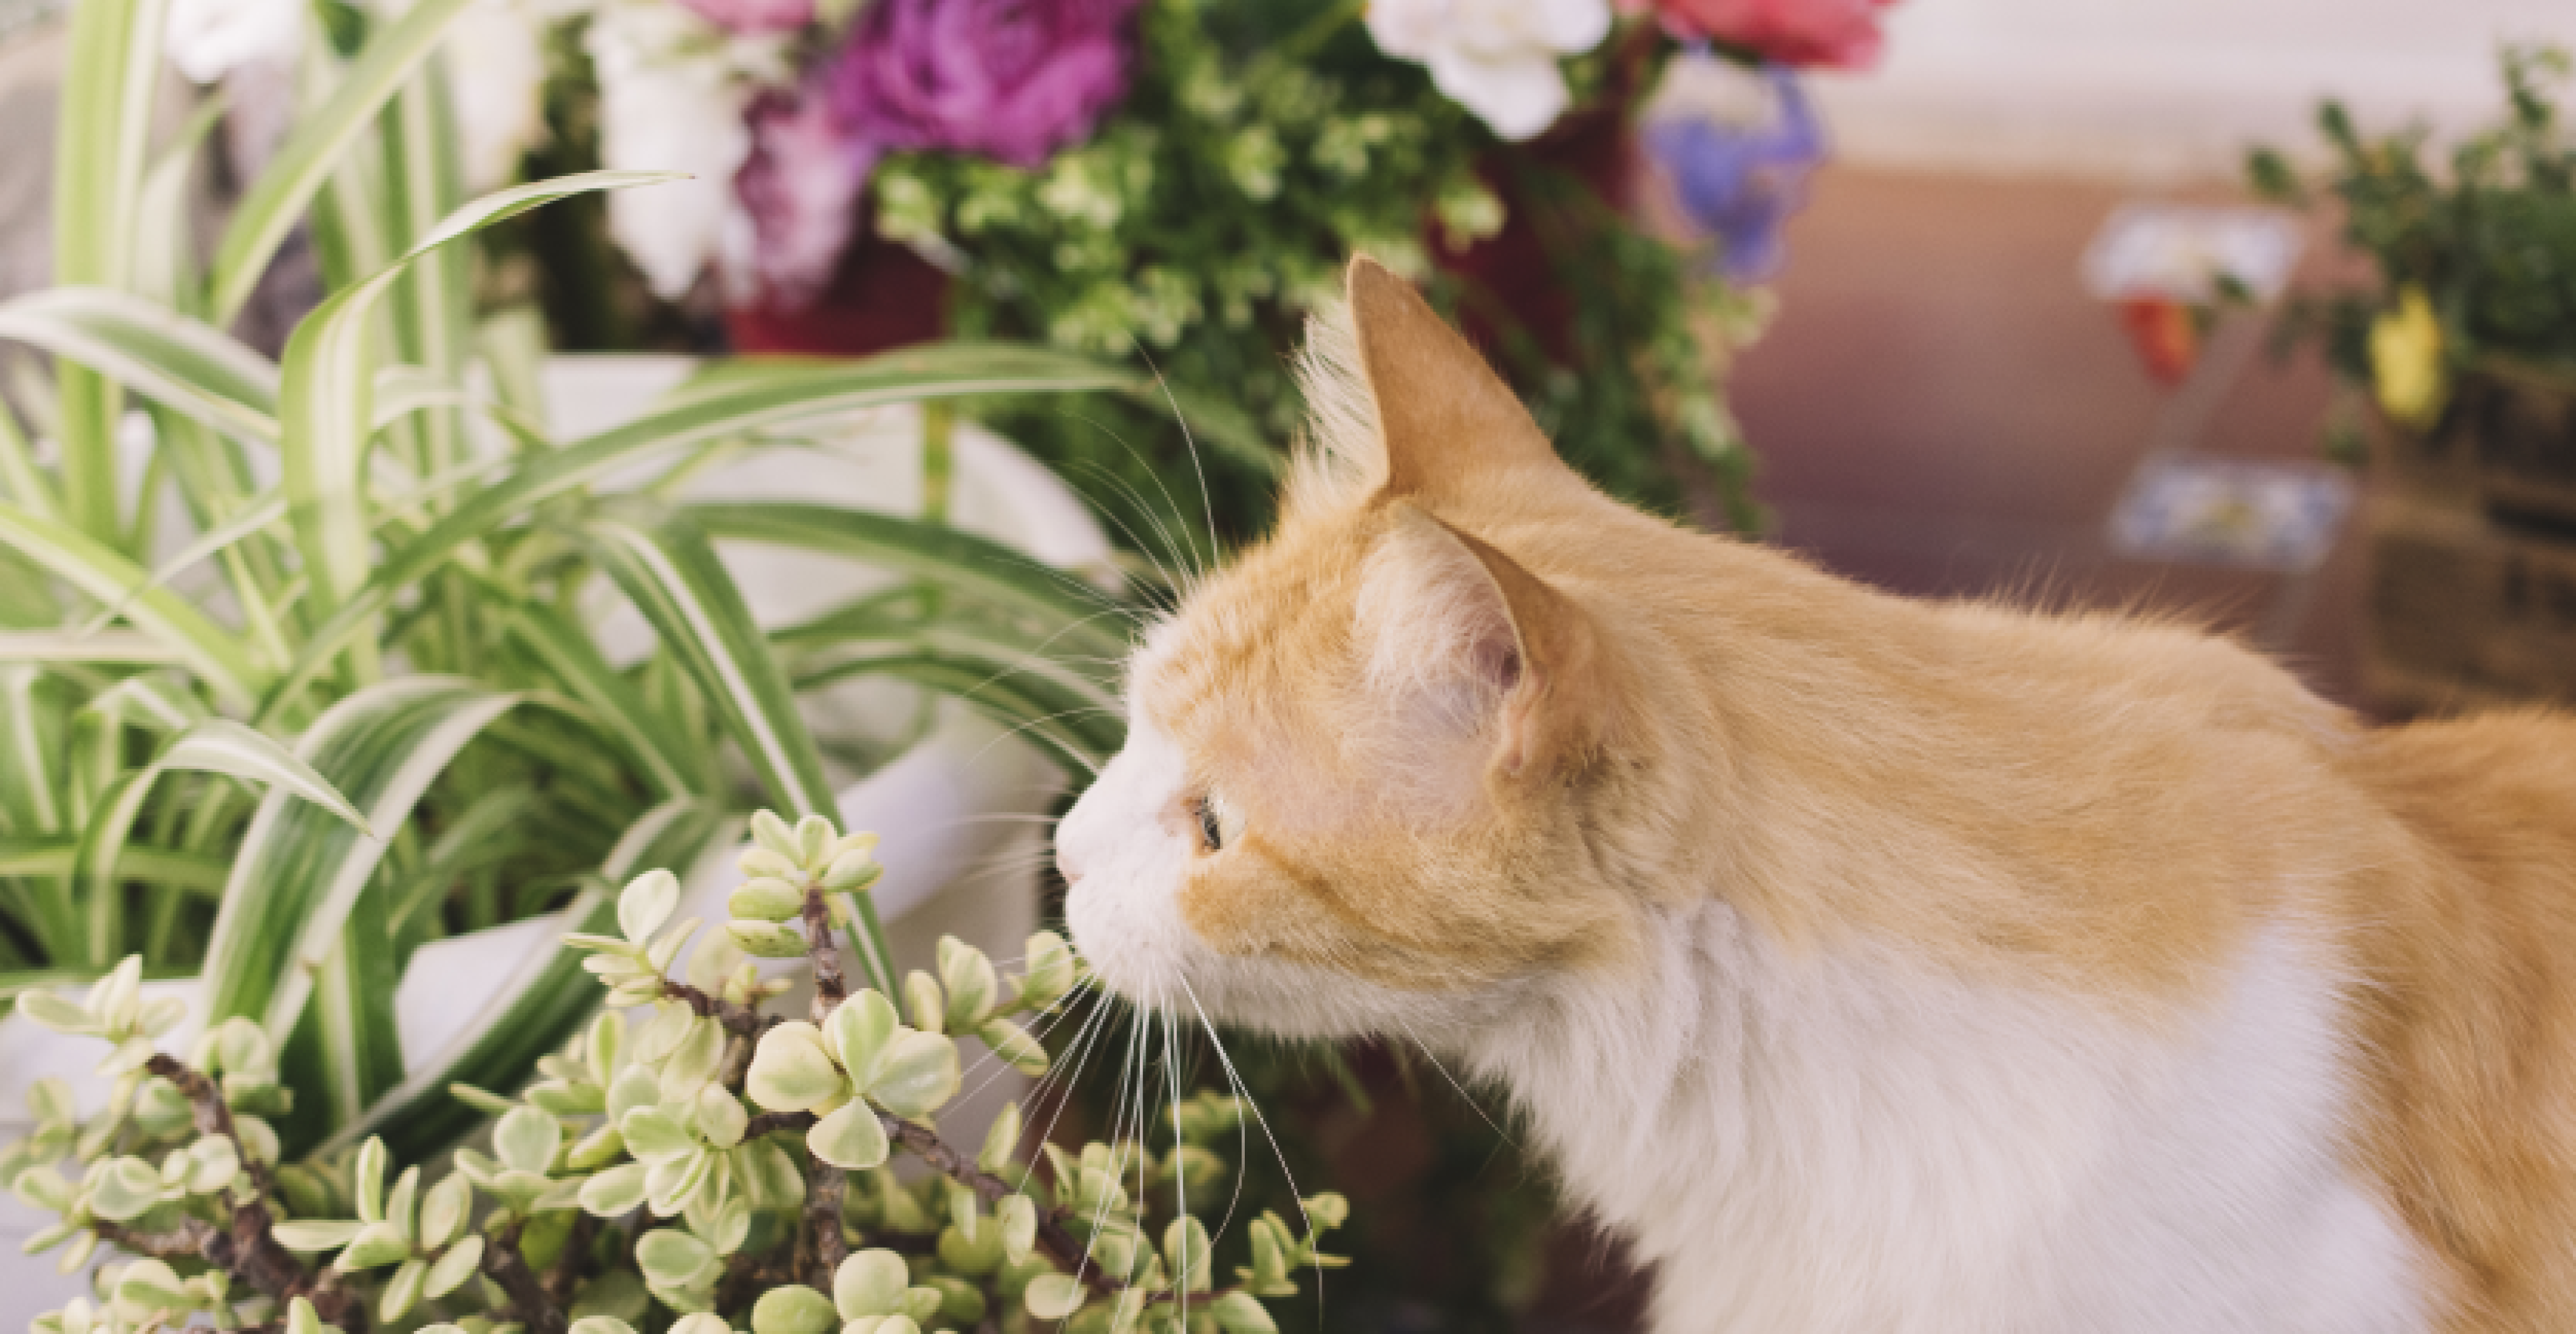 Ask Dr. Jenn: What kind of Valentine's Day flowers are safe for cats?